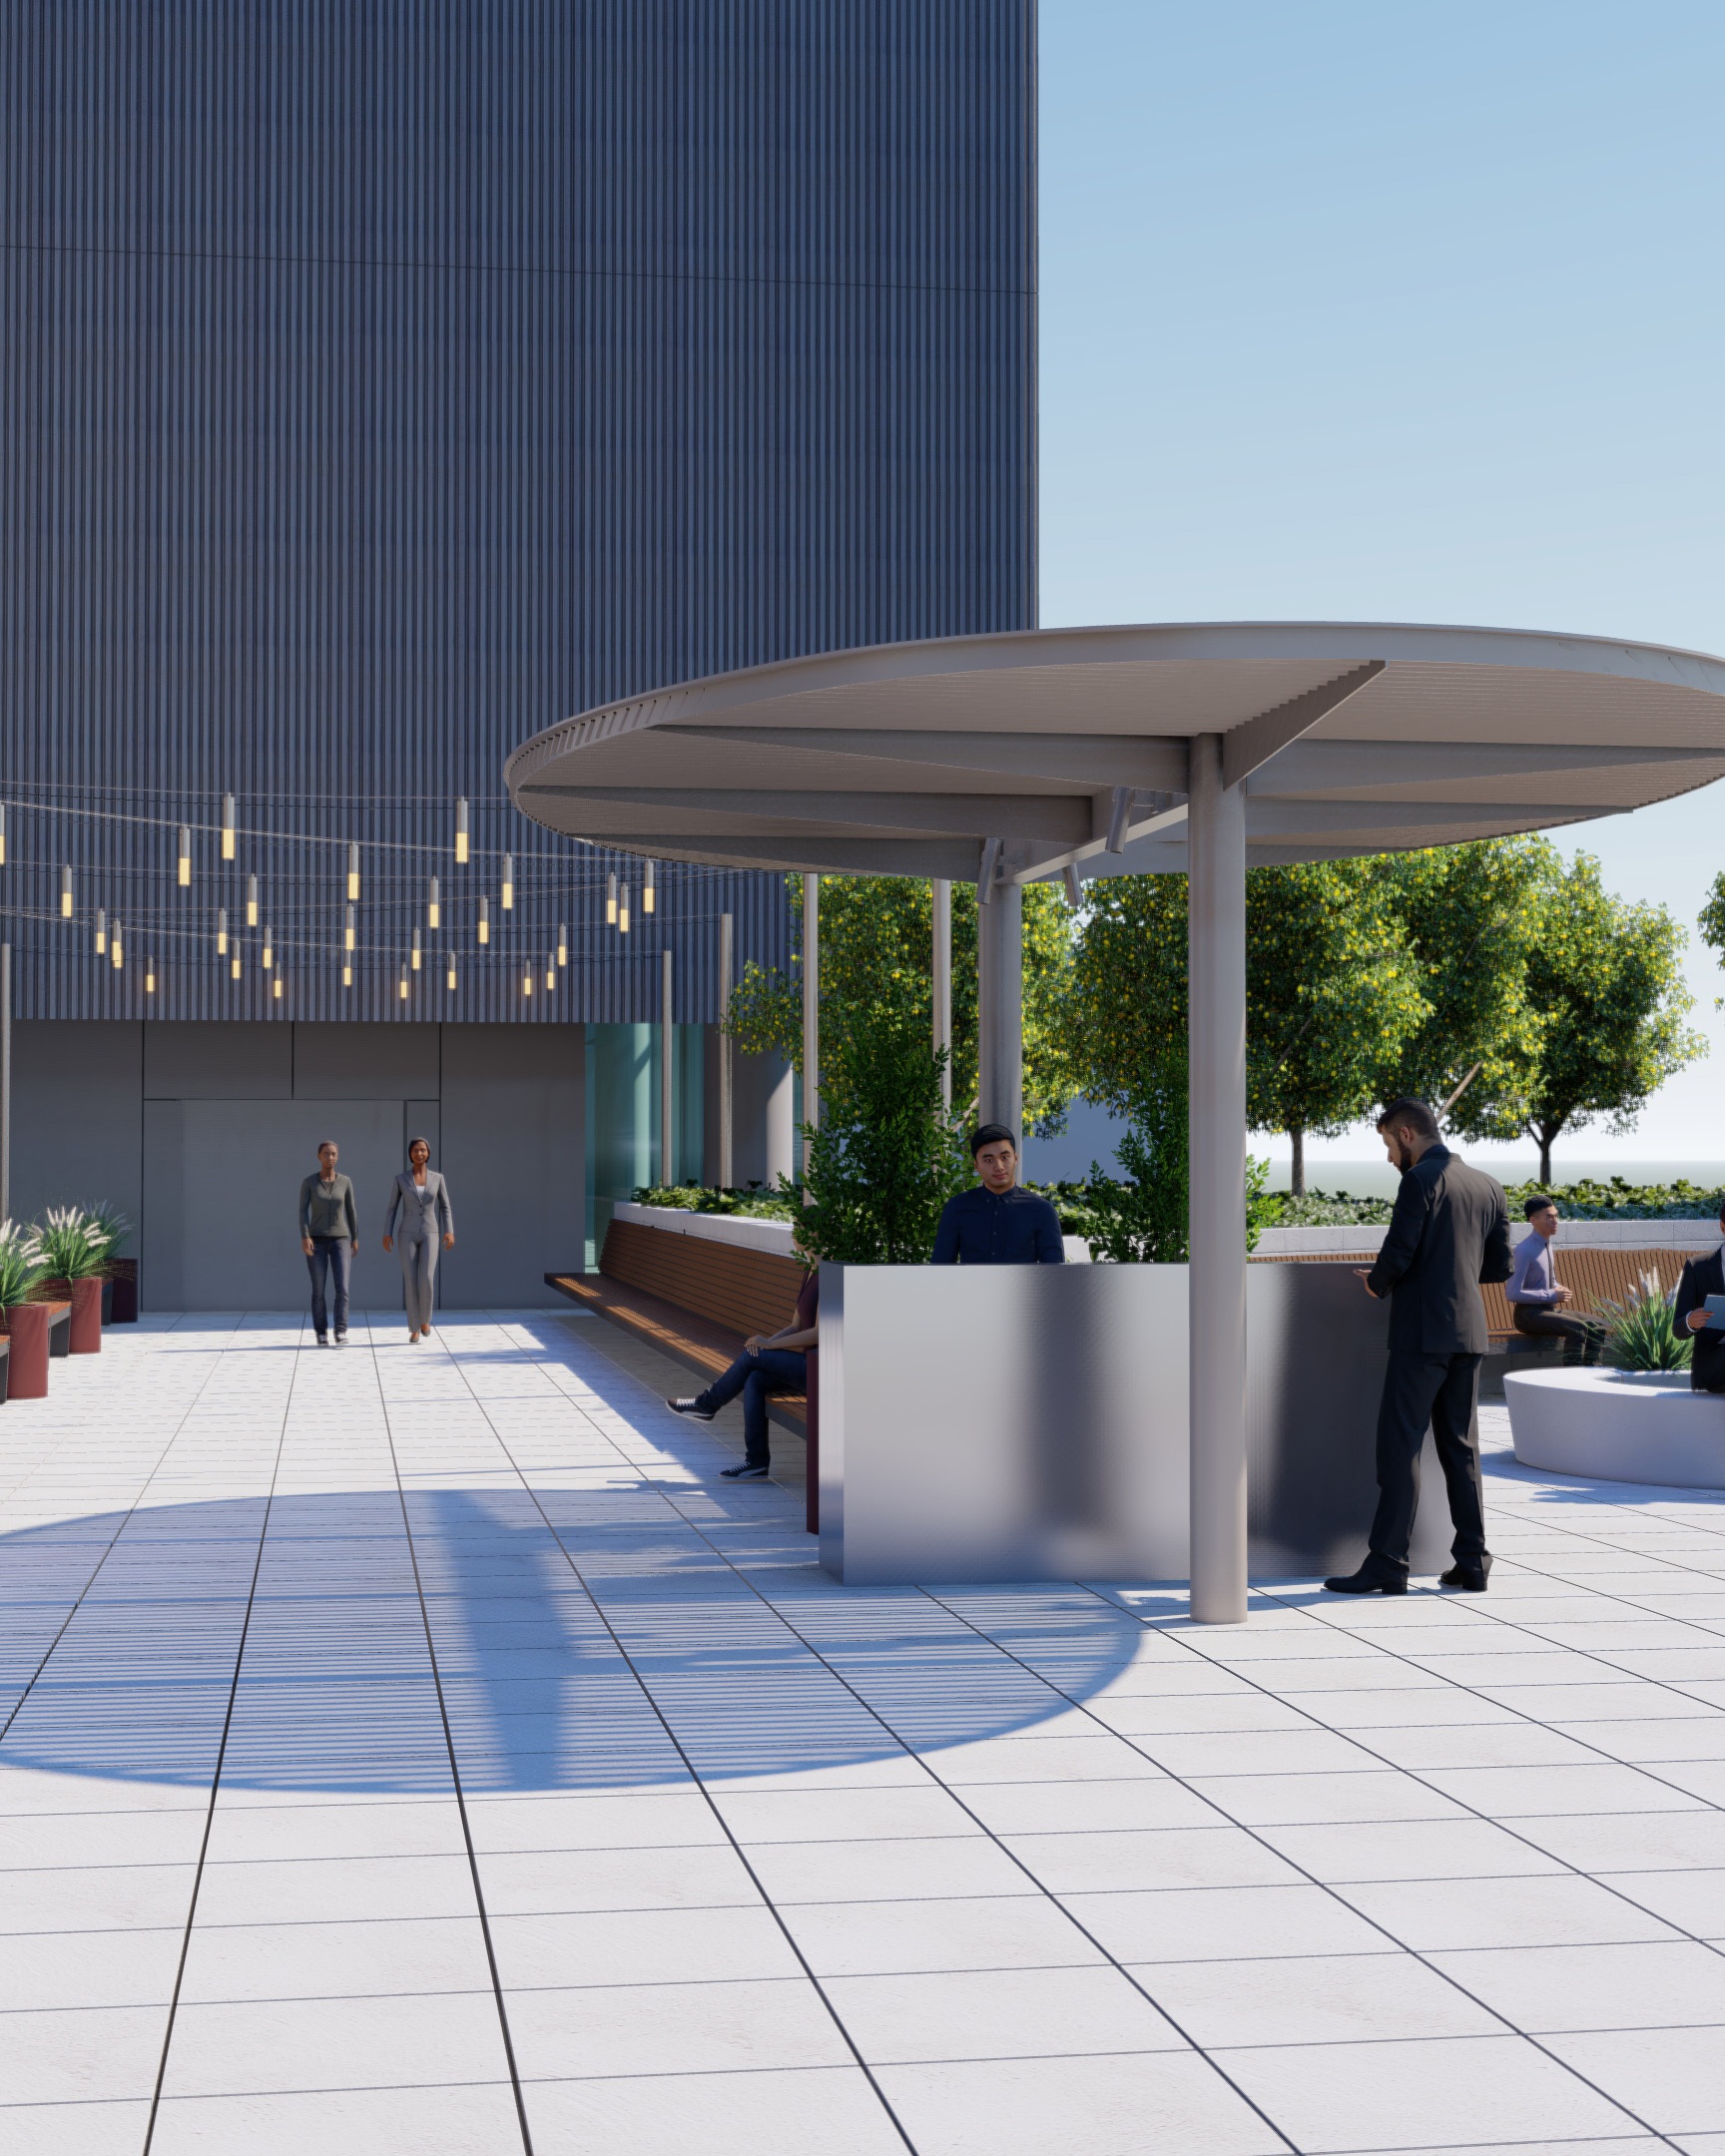 shade structure on roof terrace